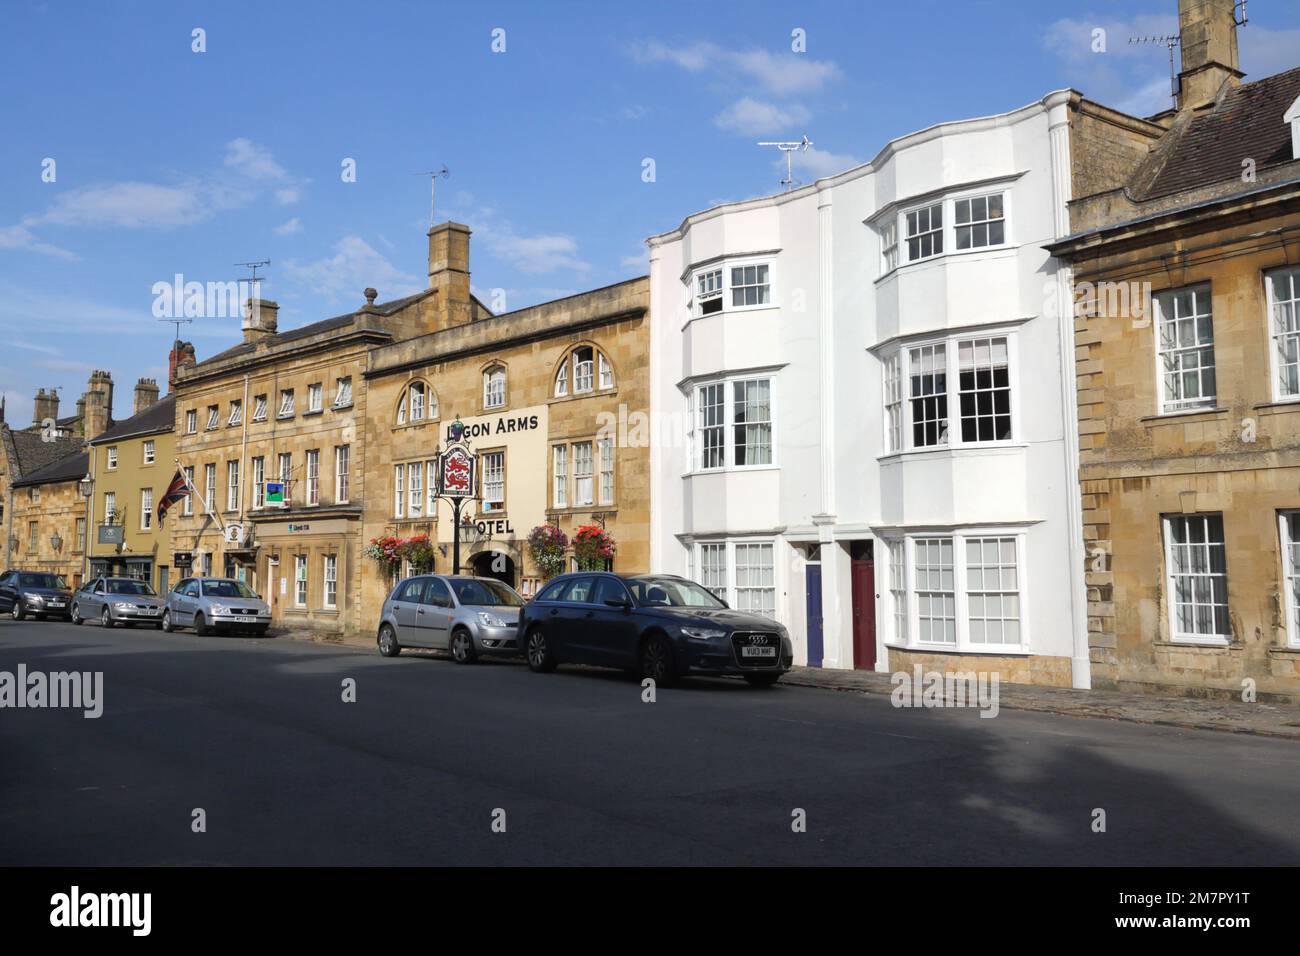 Lygon Arms Hotel, Chipping Campden High Street England, town in the English Cotswolds, Public house market town historical architecture period houses Stock Photo